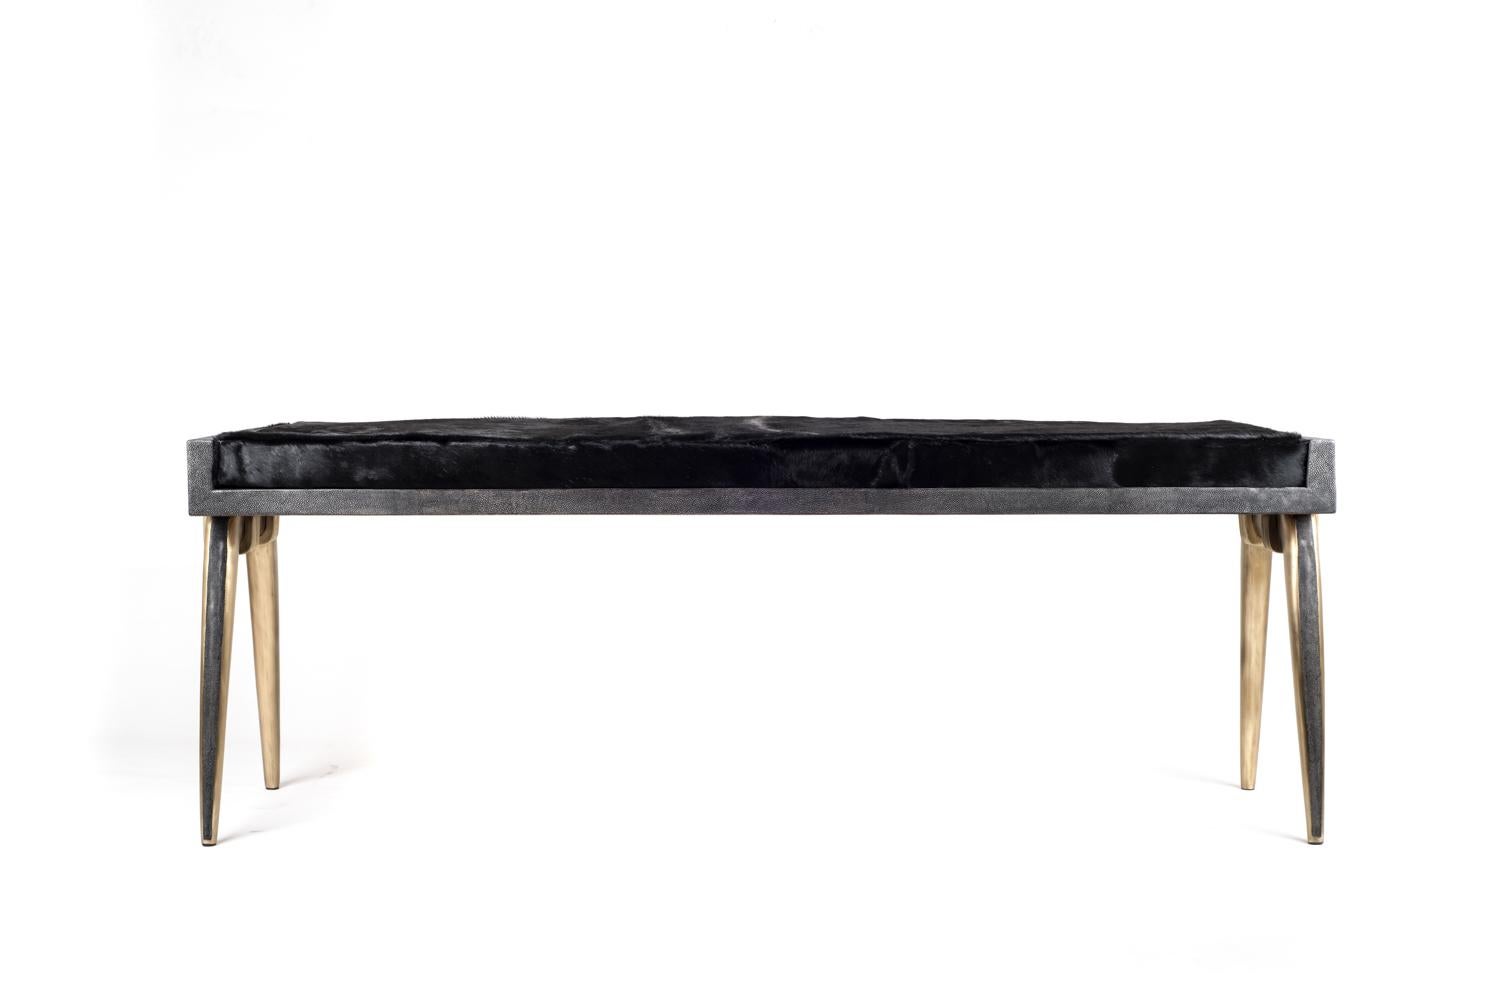 The pianist bench has subtle and elegant details on its legs, with a mixture of bronze and coal black shagreen inlay. The bronze-patina brass overlap on both sides adds another unique element to piece. The black horsehair covered cushion is